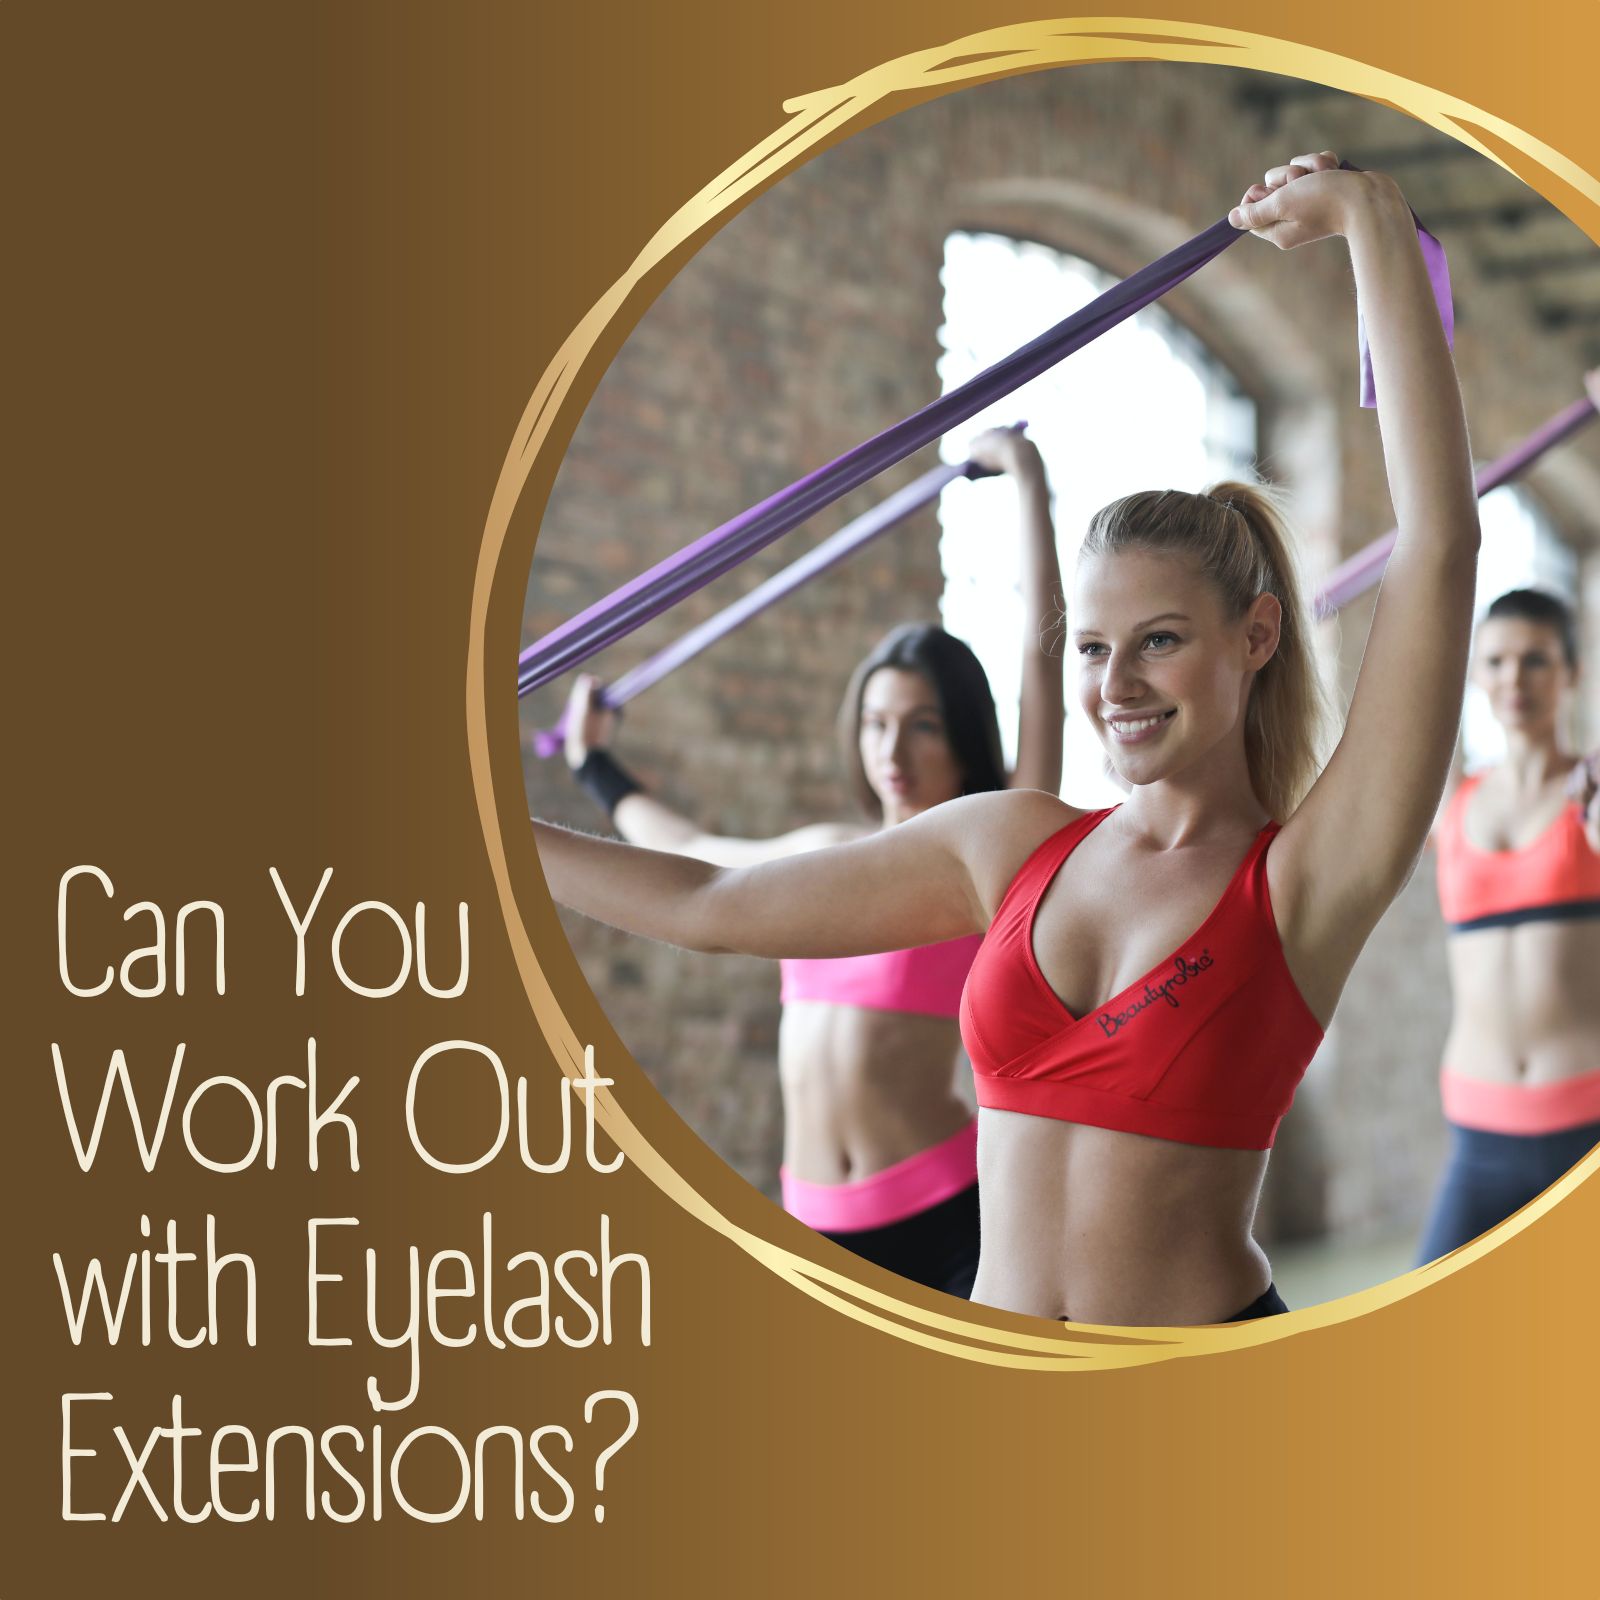 Can You Work Out with Eyelash-Extensions